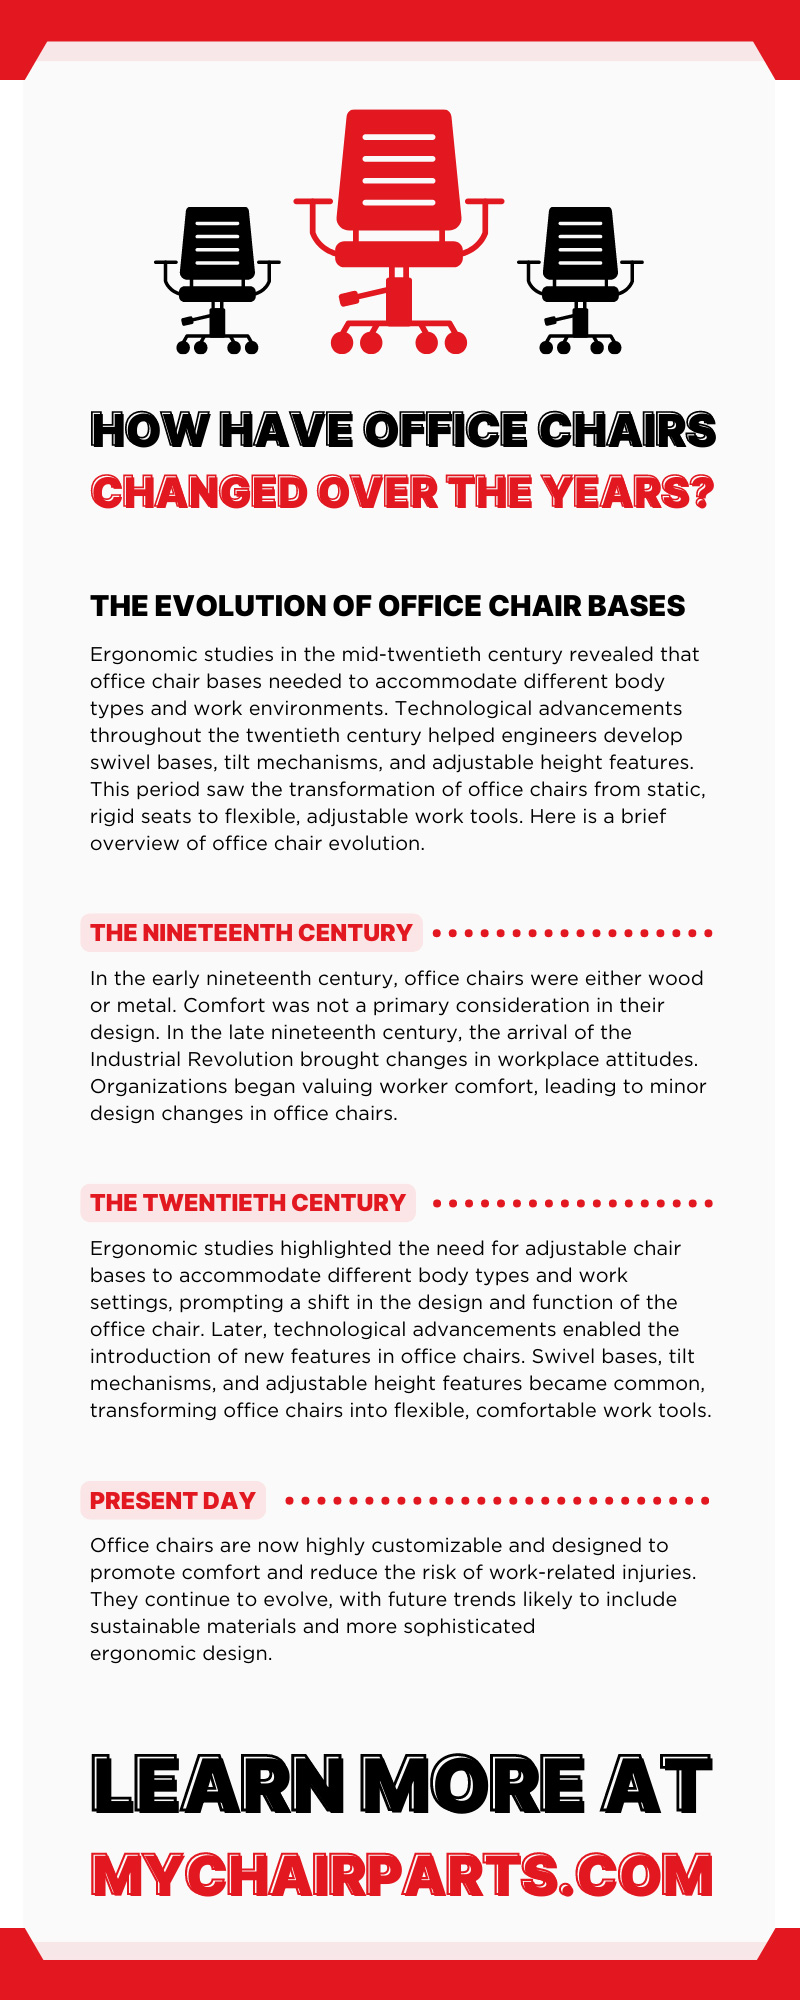 How Have Office Chairs Changed Over the Years?